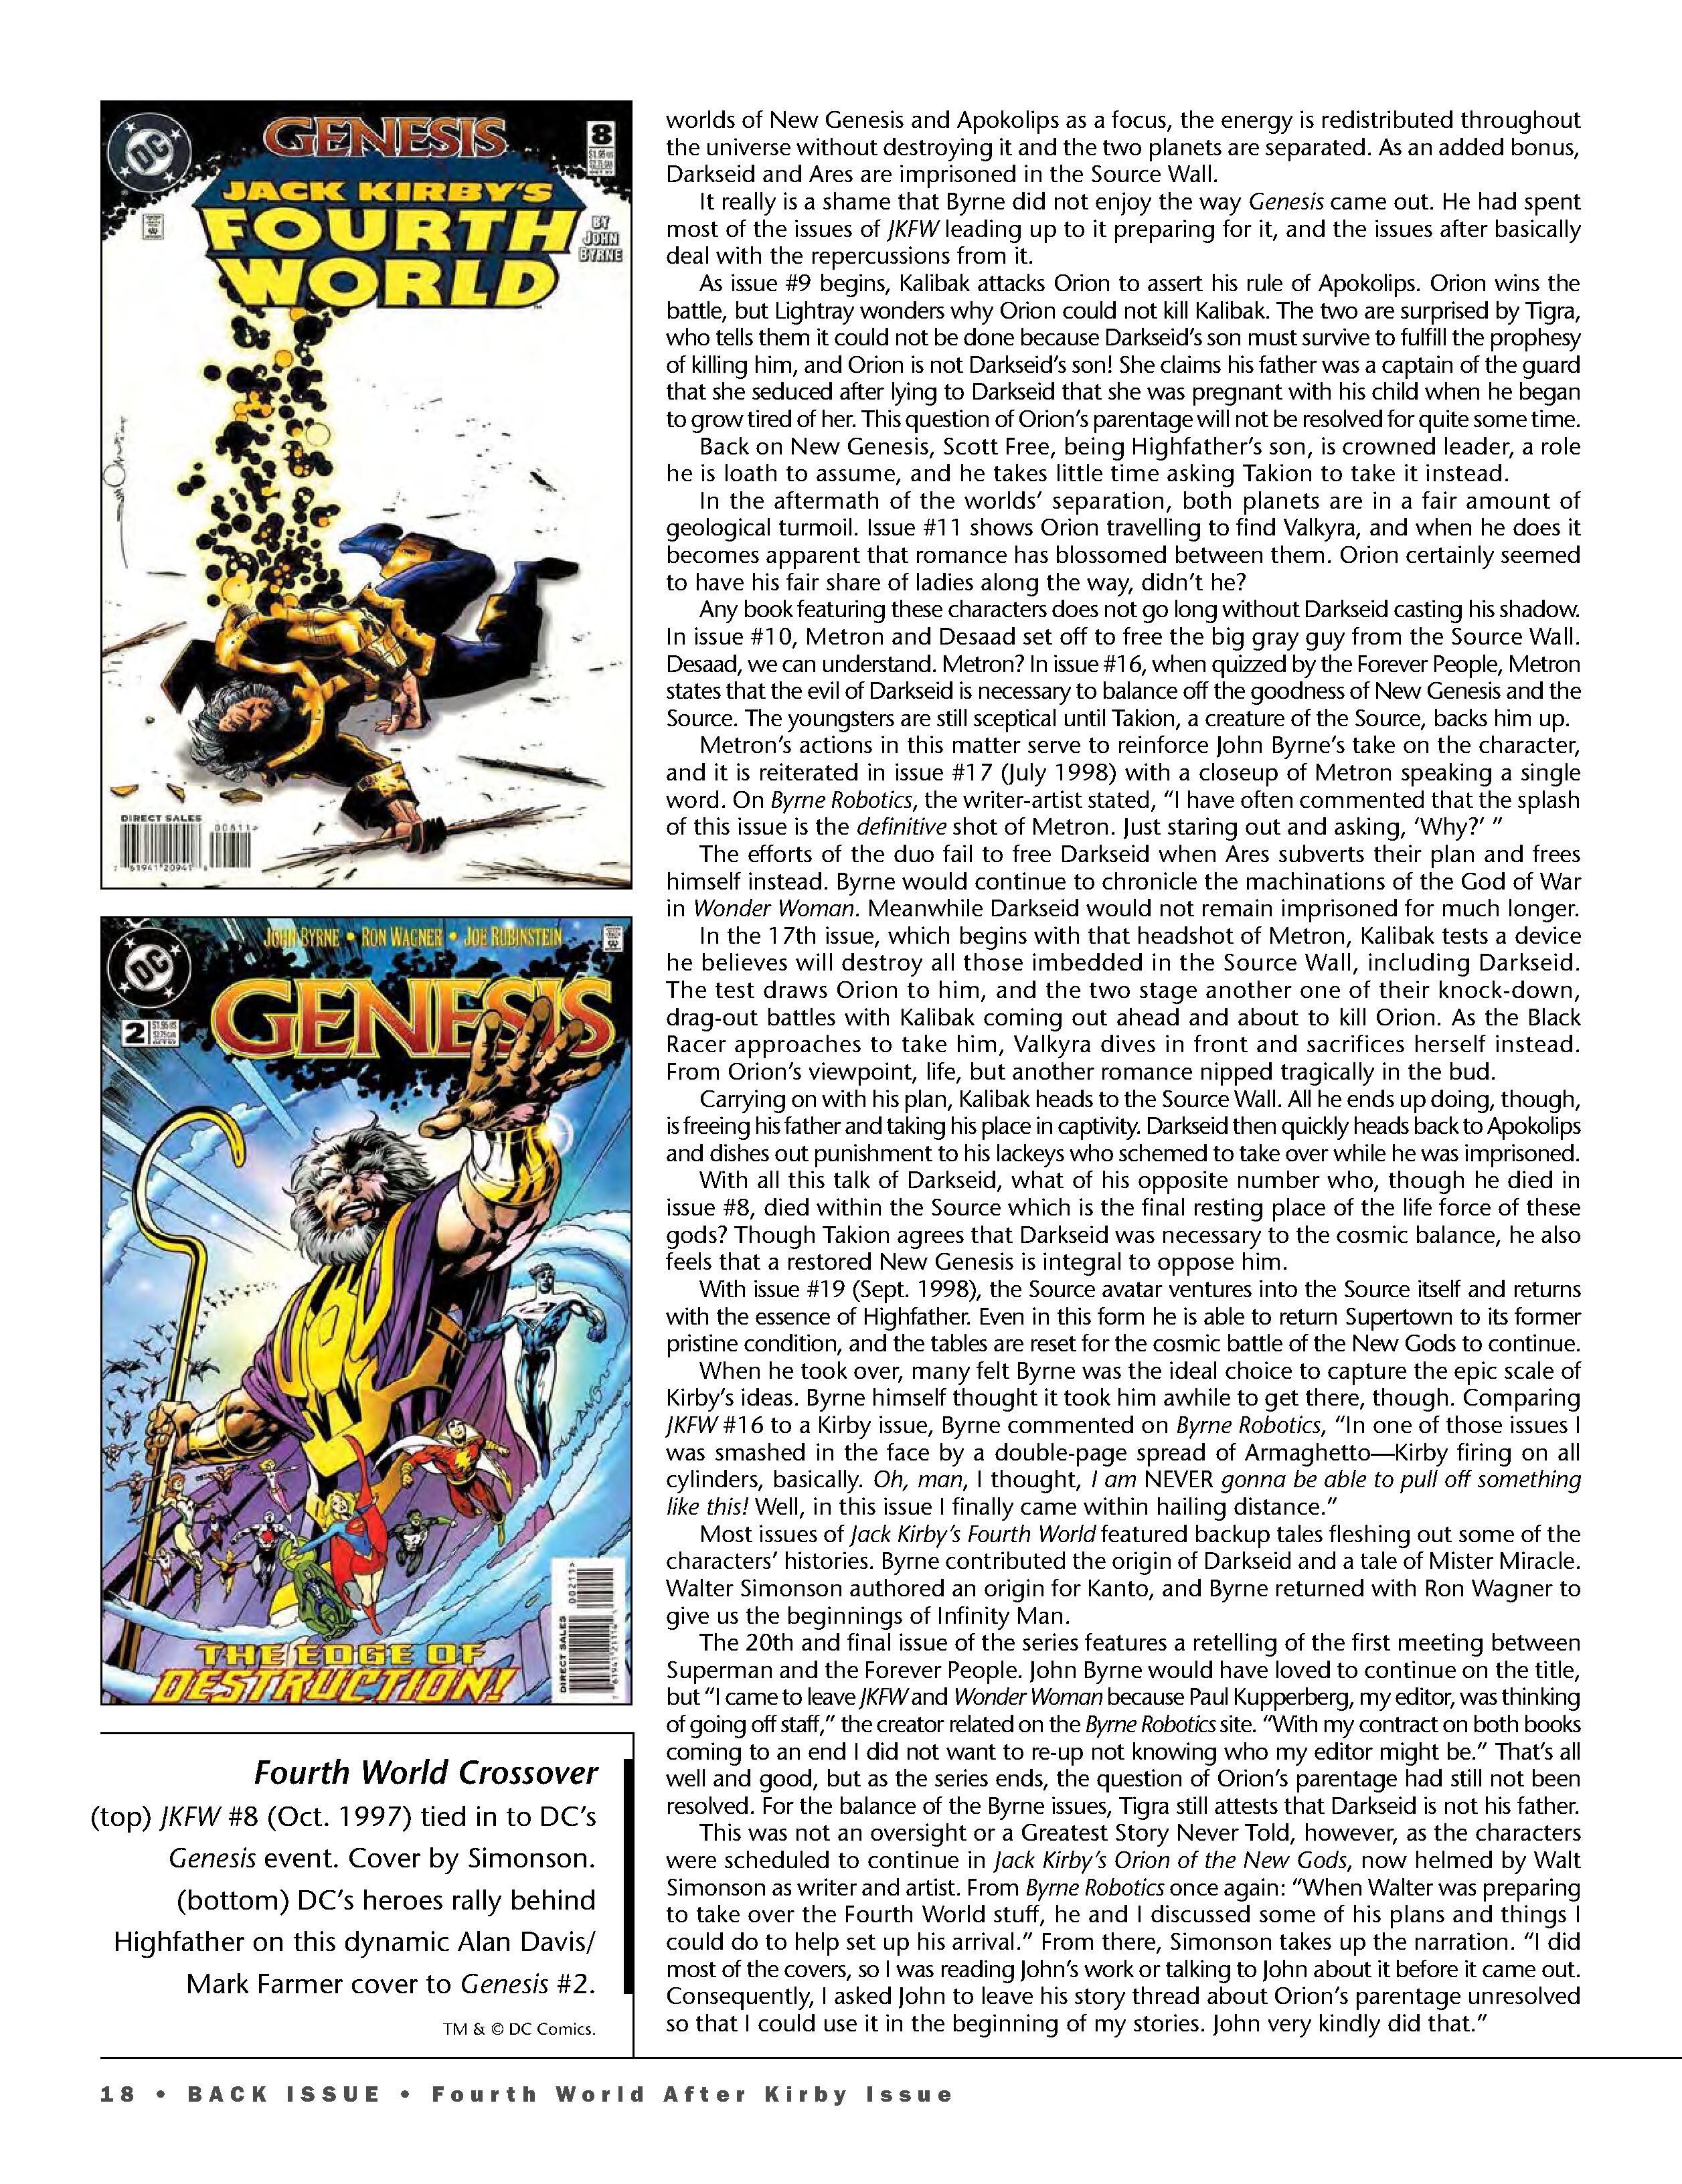 Read online Back Issue comic -  Issue #104 - 20